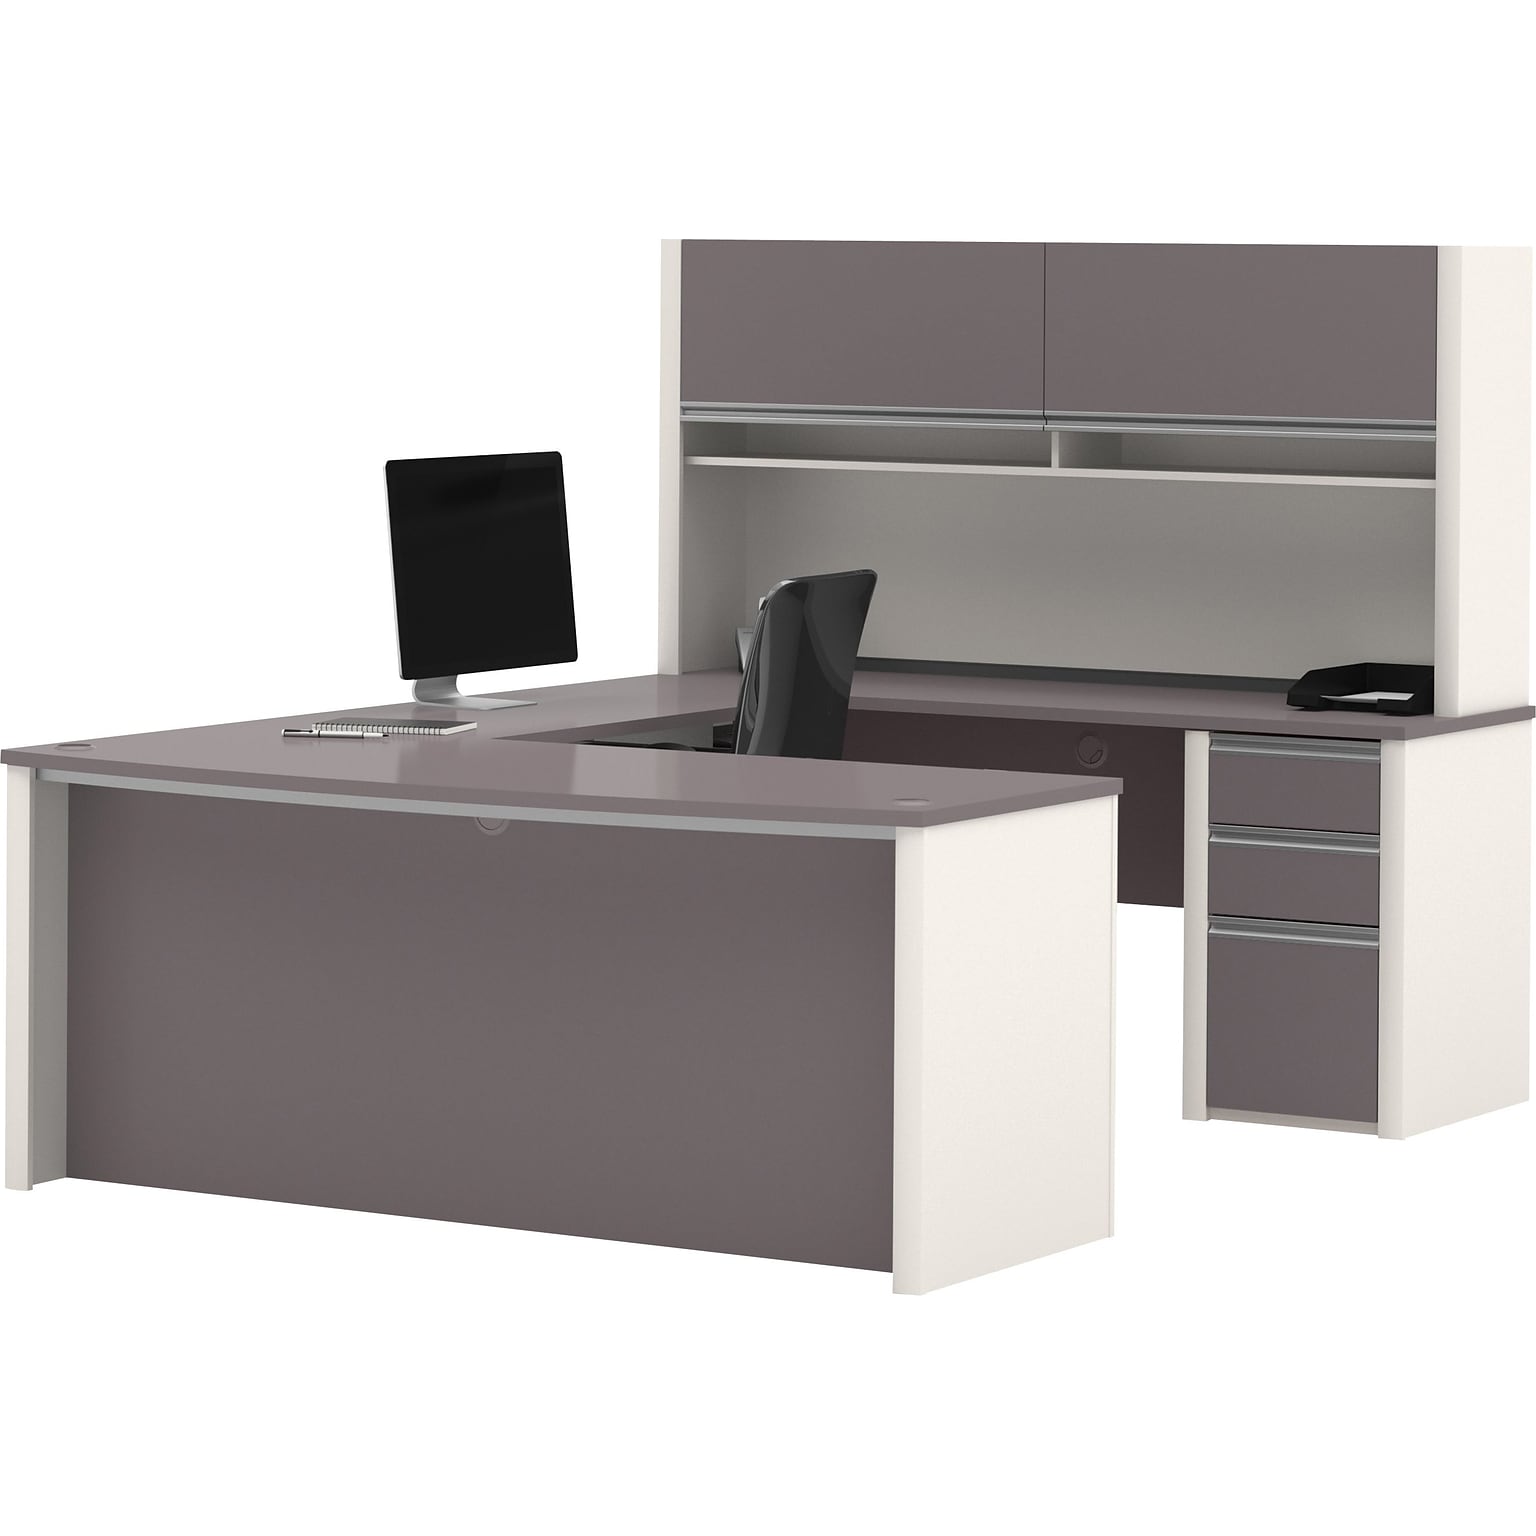 Bestar® Connexion Collection 46W U-Shaped Desk with Pedestal and Hutch, Sandstone and Slate (93879-59)